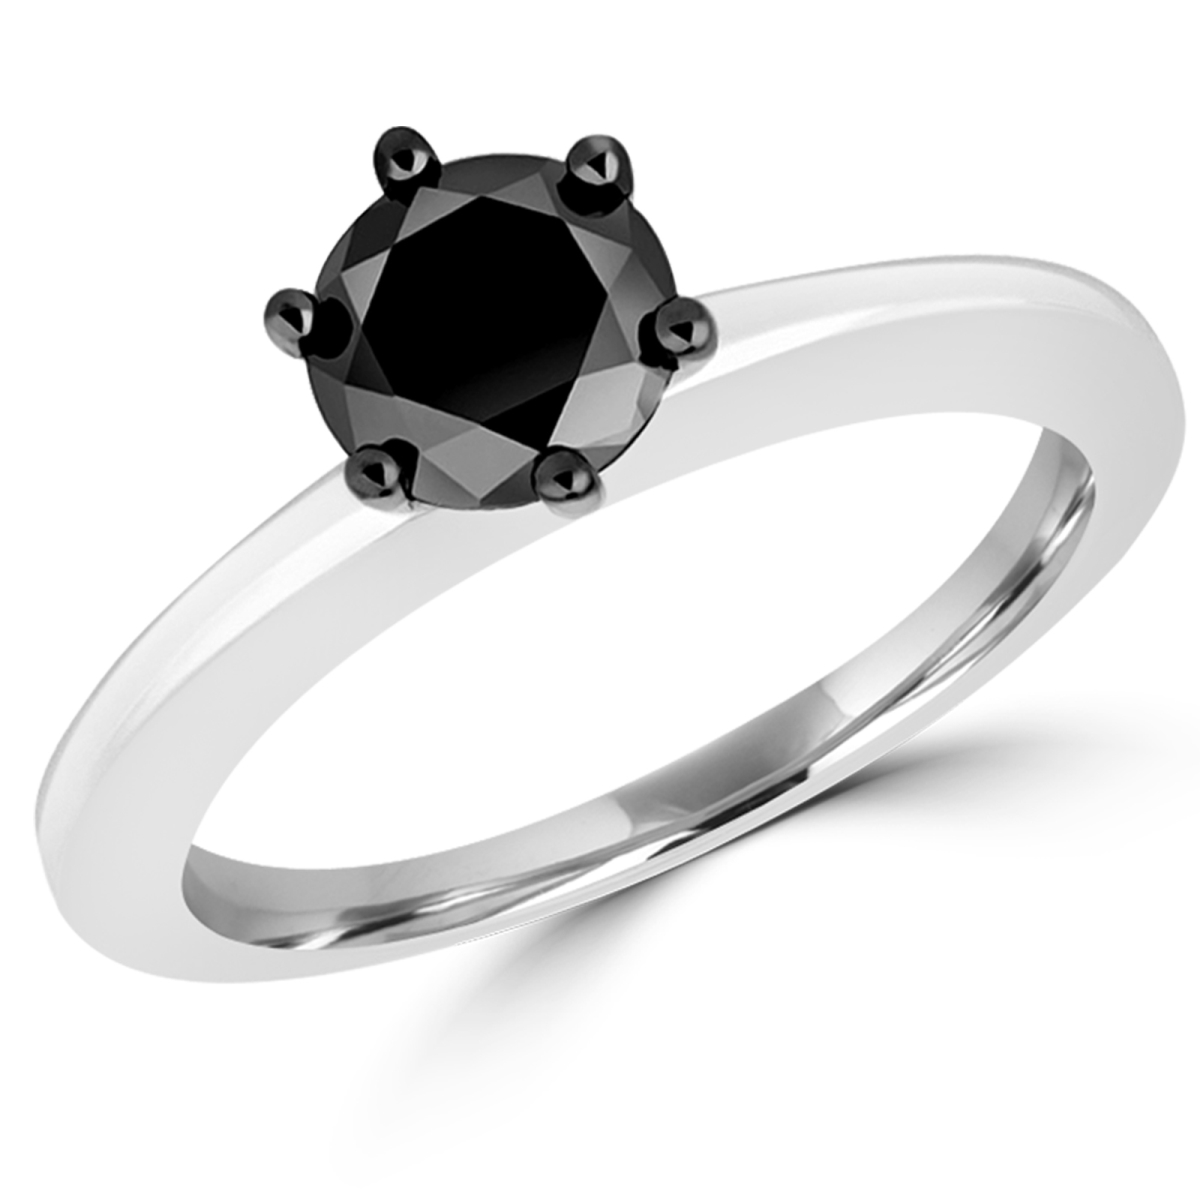 Picture of Majesty Diamonds MDR170038 1.50 CT Round BlacK Diamond 6 Prong Solitaire Engagement Ring in 10K